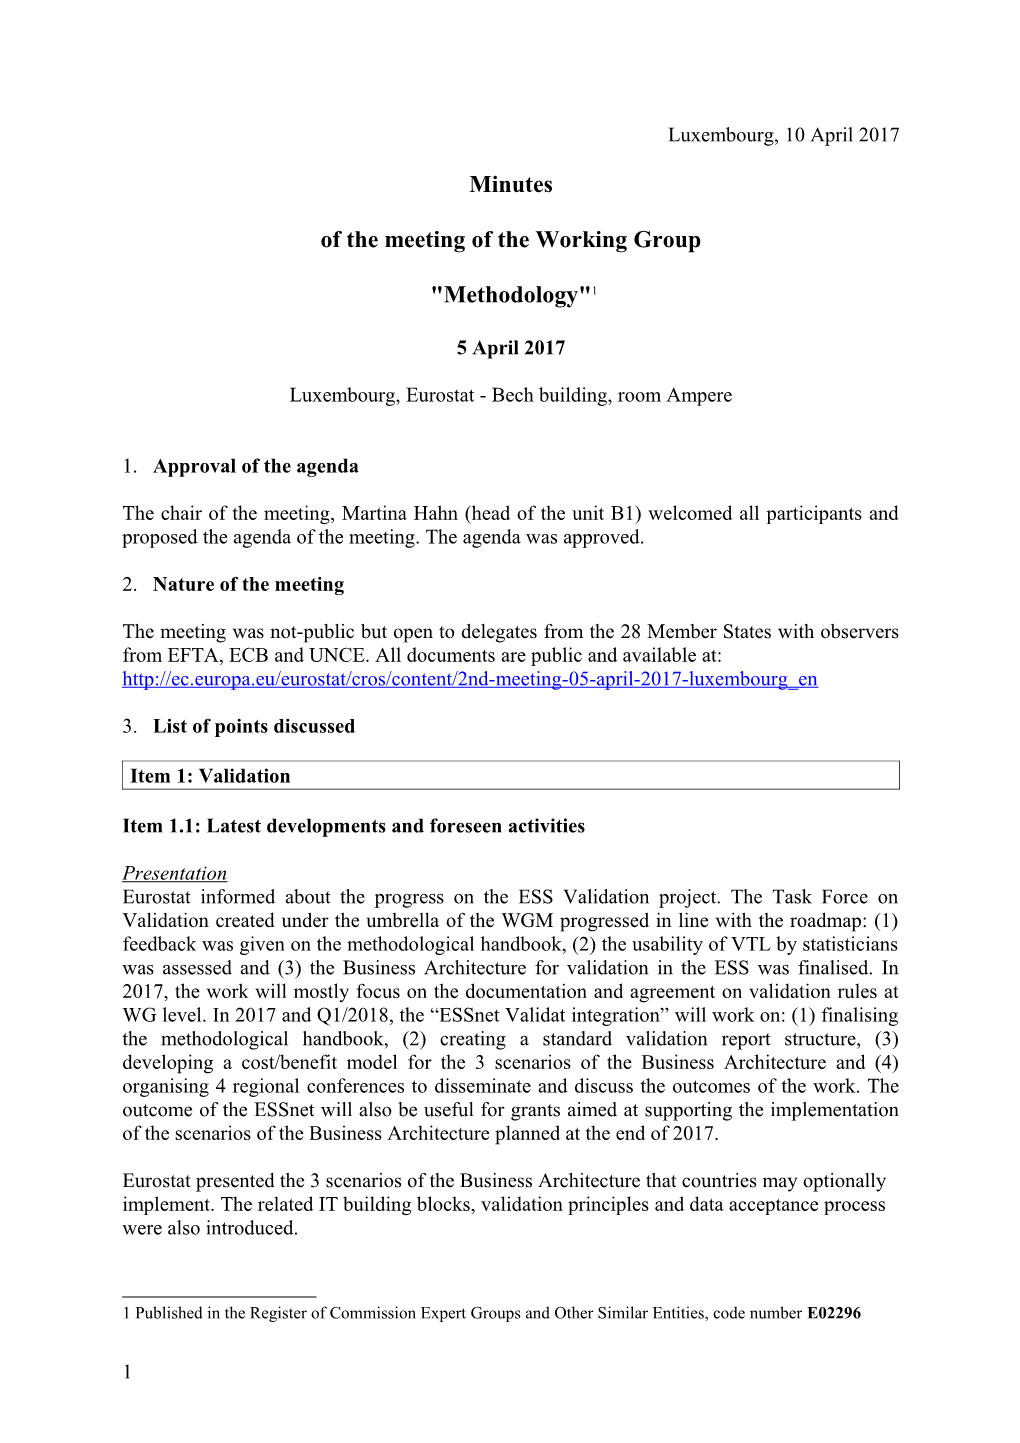 Of the Meeting of the Working Group